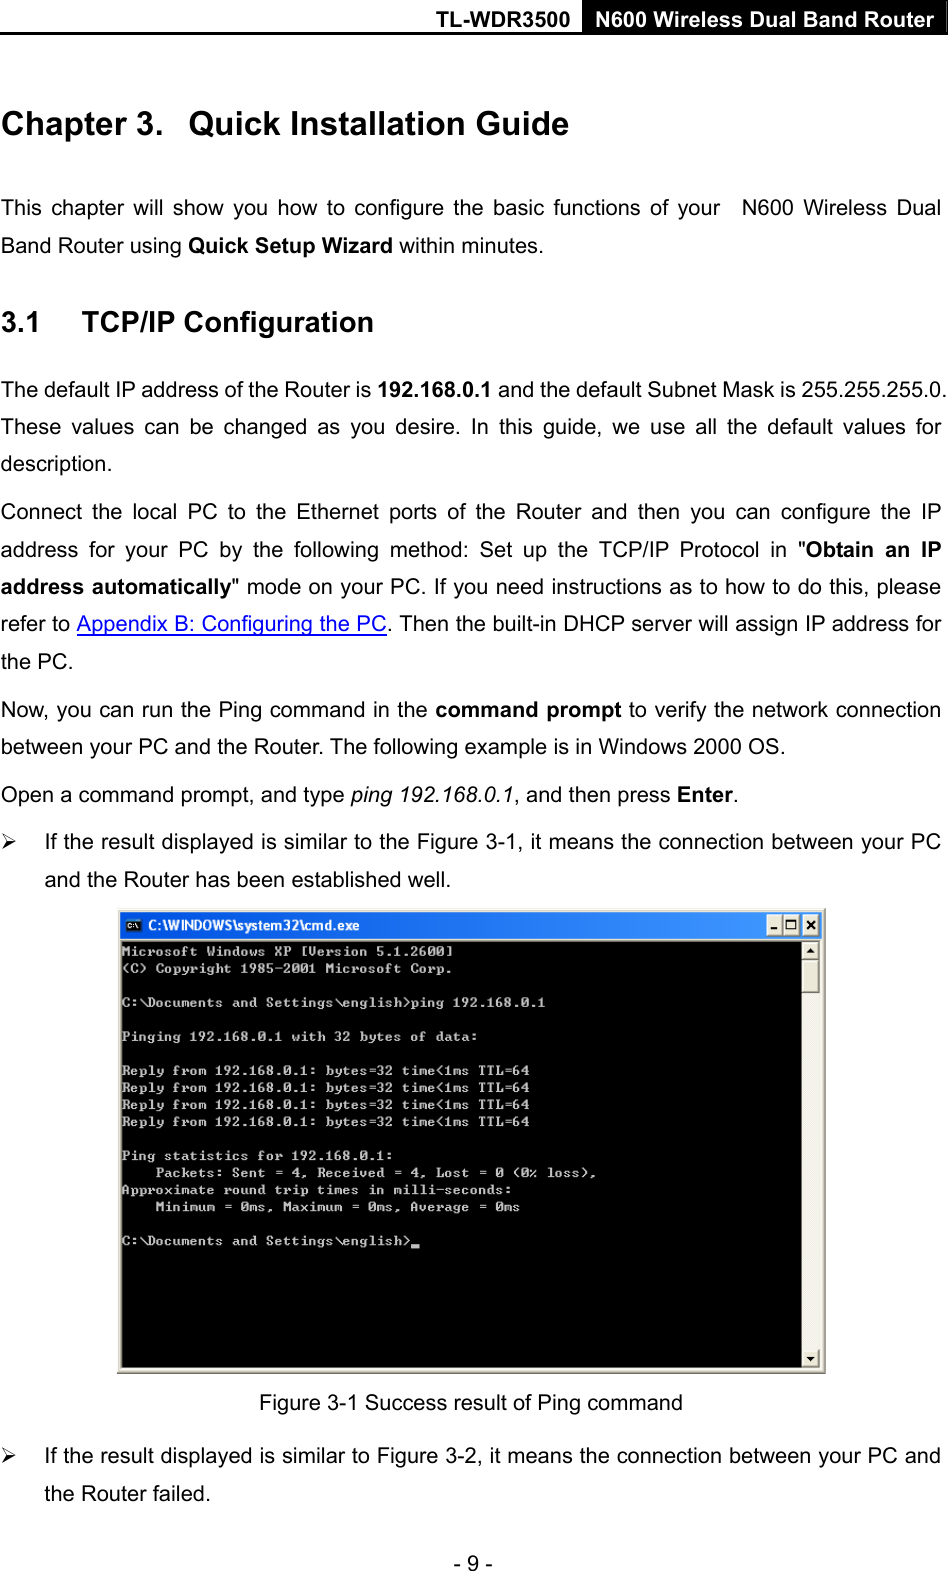 TL-WDR3500 N600 Wireless Dual Band Router - 9 - Chapter 3.  Quick Installation Guide This chapter will show you how to configure the basic functions of your  N600 Wireless Dual Band Router using Quick Setup Wizard within minutes. 3.1  TCP/IP Configuration The default IP address of the Router is 192.168.0.1 and the default Subnet Mask is 255.255.255.0. These values can be changed as you desire. In this guide, we use all the default values for description. Connect the local PC to the Ethernet ports of the Router and then you can configure the IP address for your PC by the following method: Set up the TCP/IP Protocol in &quot;Obtain an IP address automatically&quot; mode on your PC. If you need instructions as to how to do this, please refer to Appendix B: Configuring the PC. Then the built-in DHCP server will assign IP address for the PC. Now, you can run the Ping command in the command prompt to verify the network connection between your PC and the Router. The following example is in Windows 2000 OS. Open a command prompt, and type ping 192.168.0.1, and then press Enter.   If the result displayed is similar to the Figure 3-1, it means the connection between your PC and the Router has been established well.    Figure 3-1 Success result of Ping command   If the result displayed is similar to Figure 3-2, it means the connection between your PC and the Router failed.   